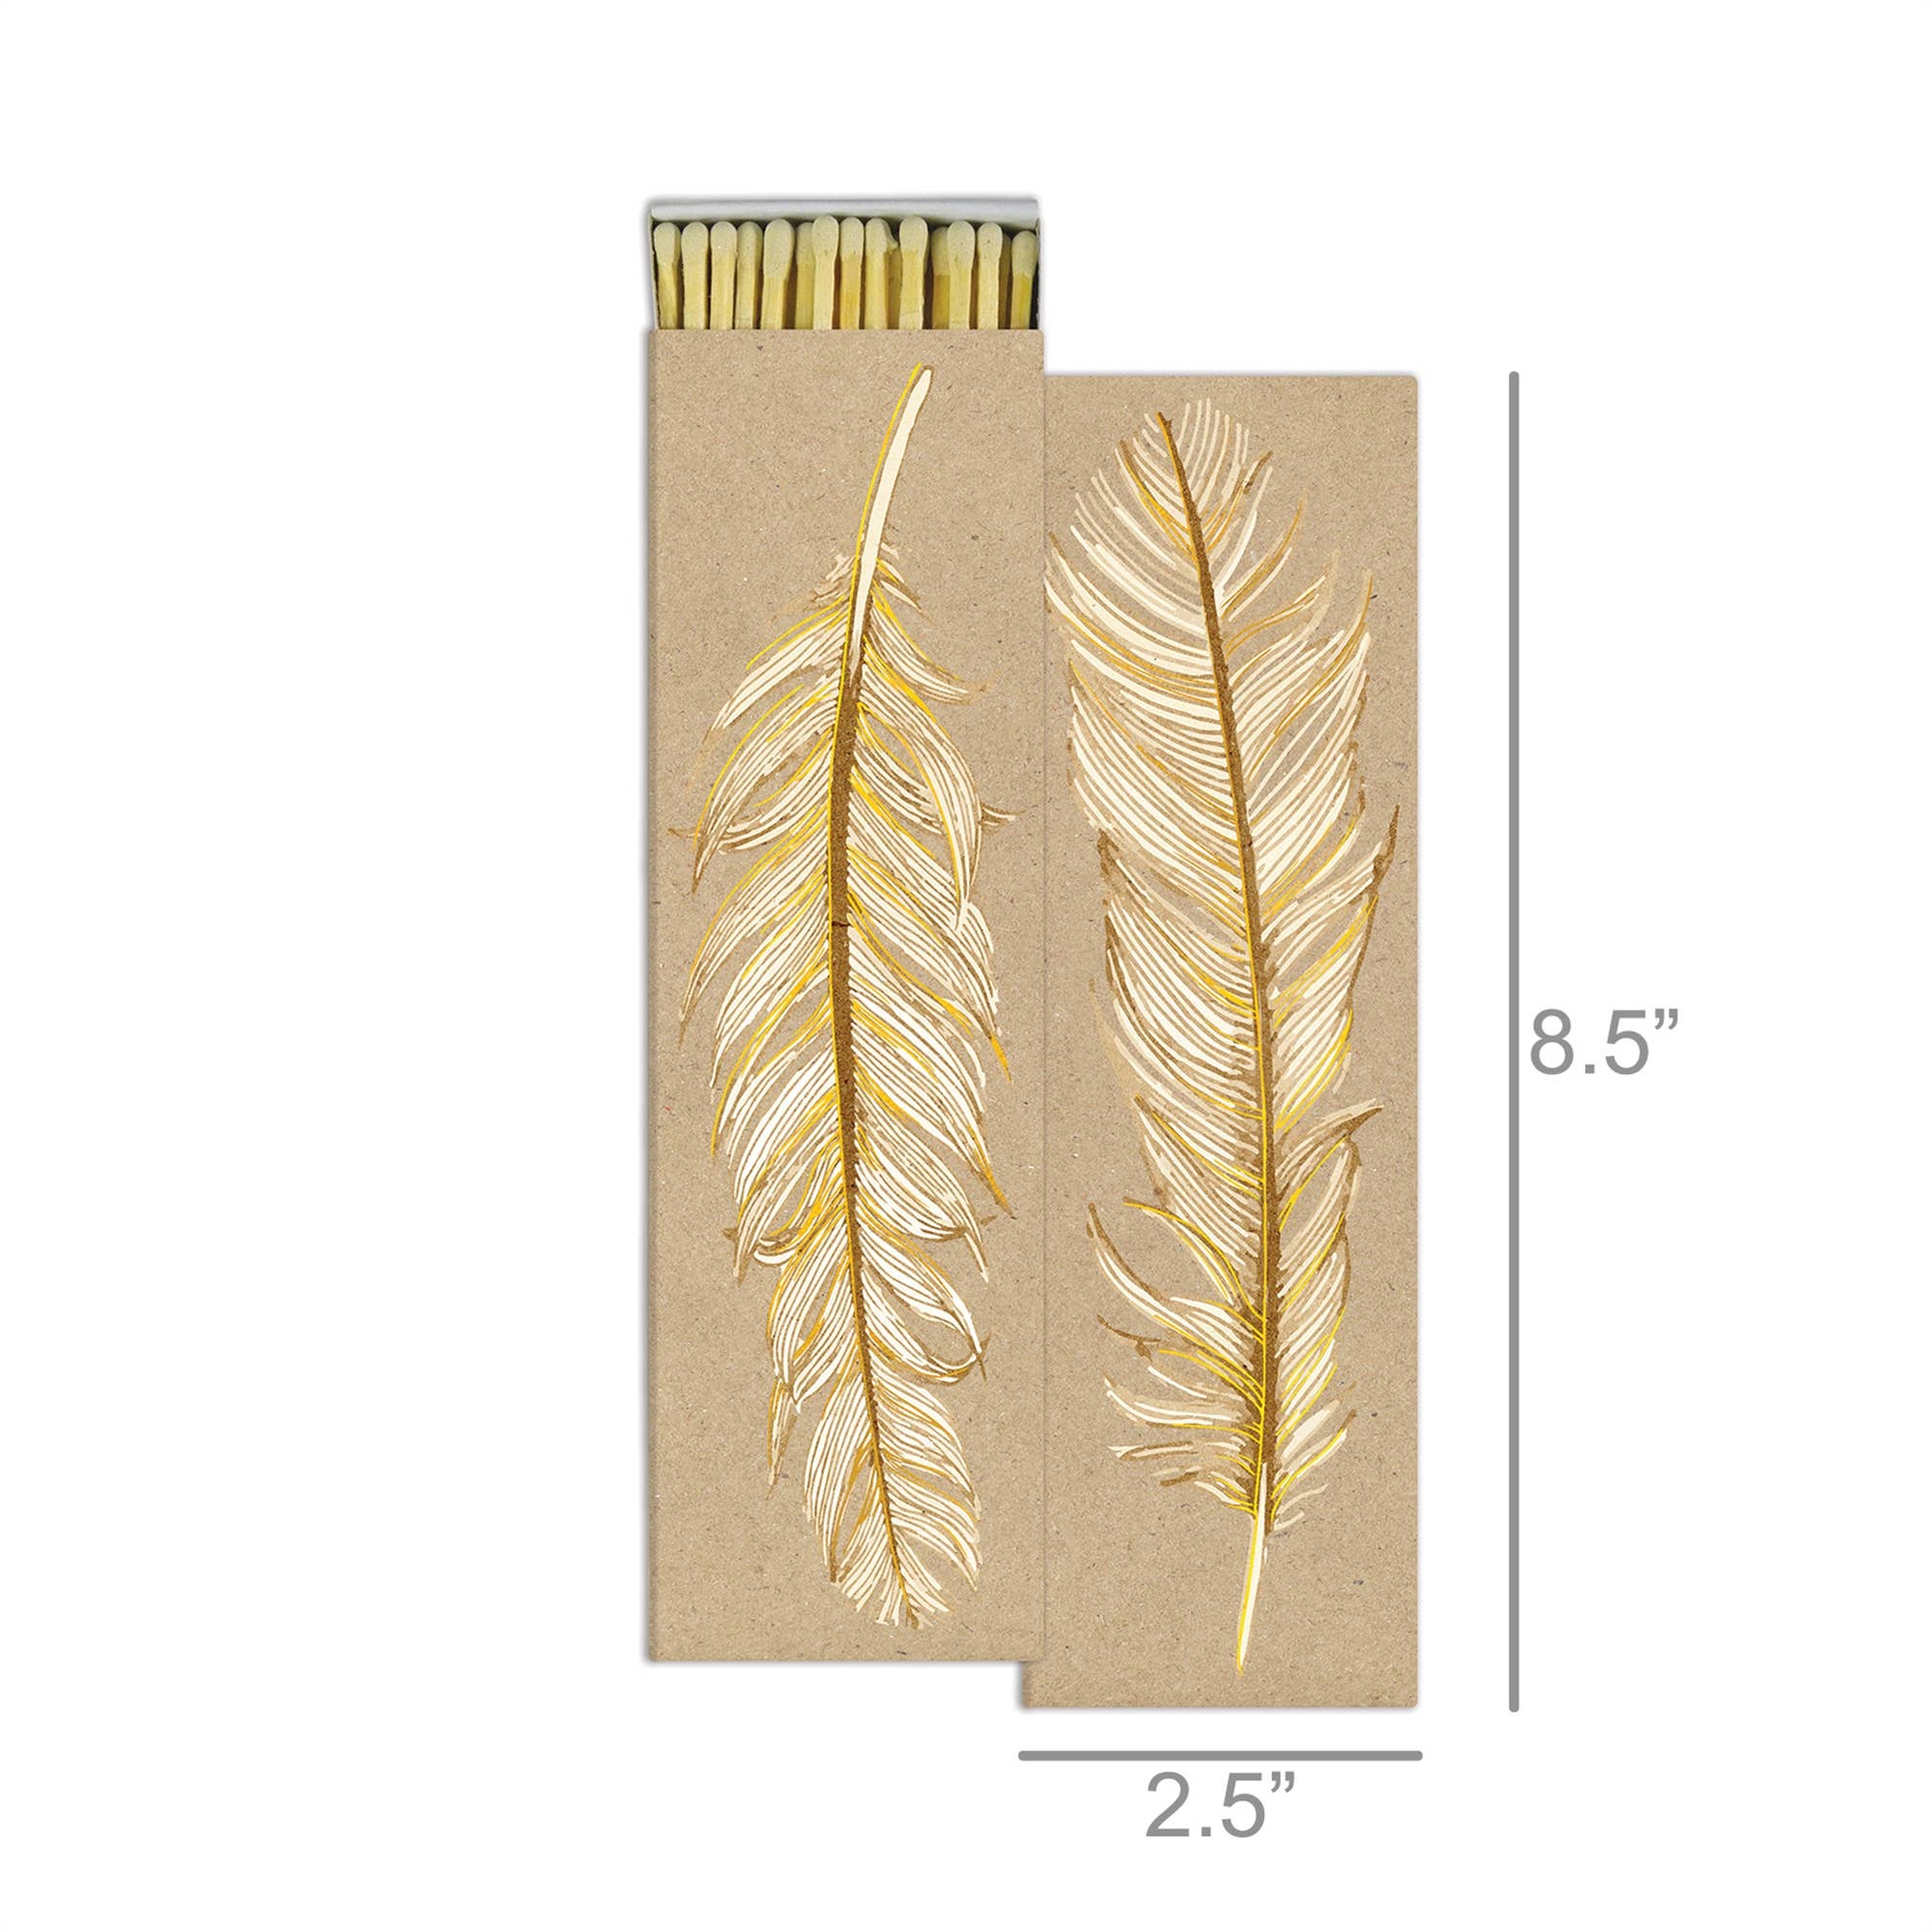 8" MATCHES - RUFFLED FEATHER